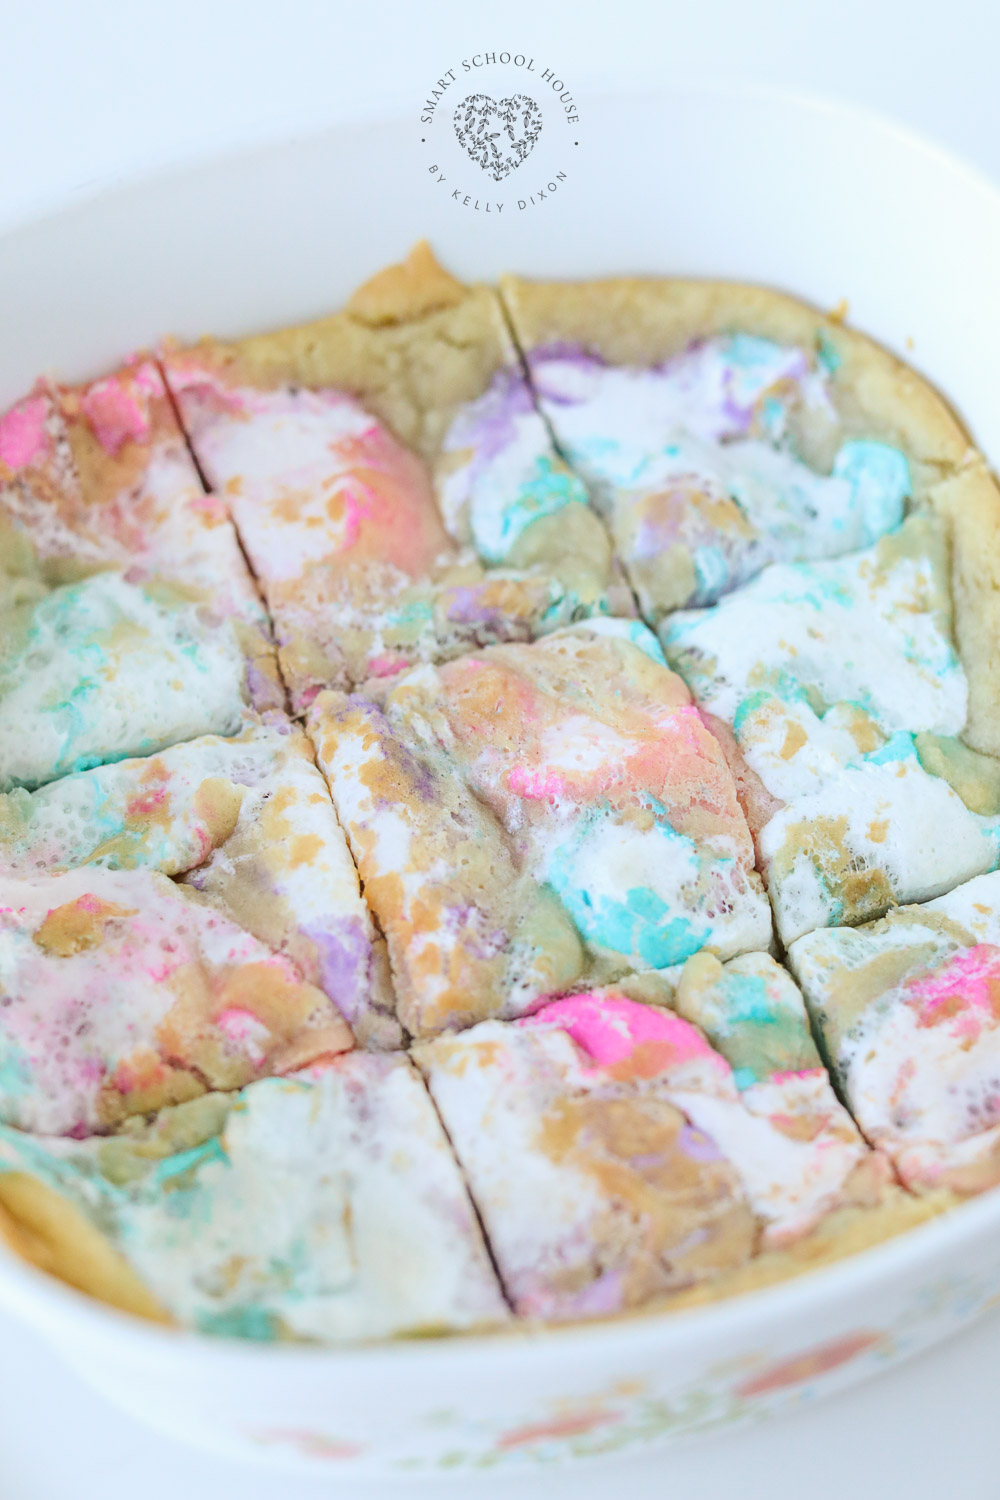 Easter Peeps Cookie Bars are everyone's favorite Peeps mixed with sugar cookies. Not only are they festive looking, but they are also so fun to make!